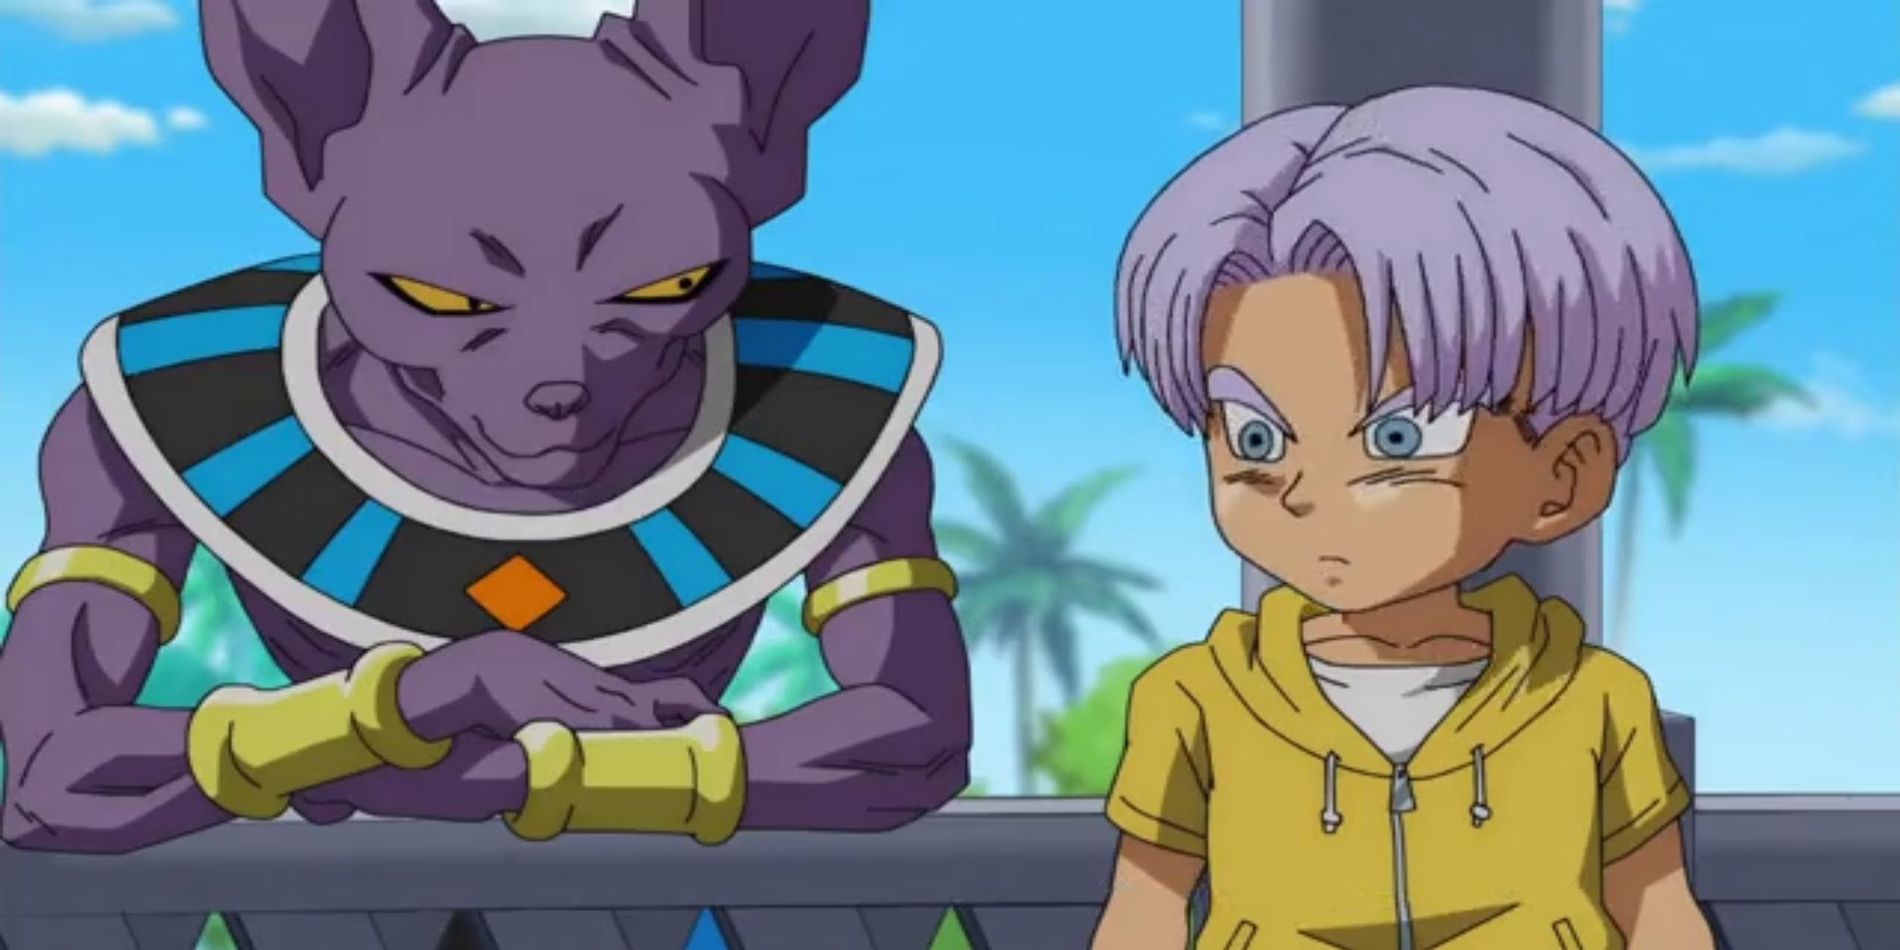 Kid Trunks And Beerus in Dragon Ball